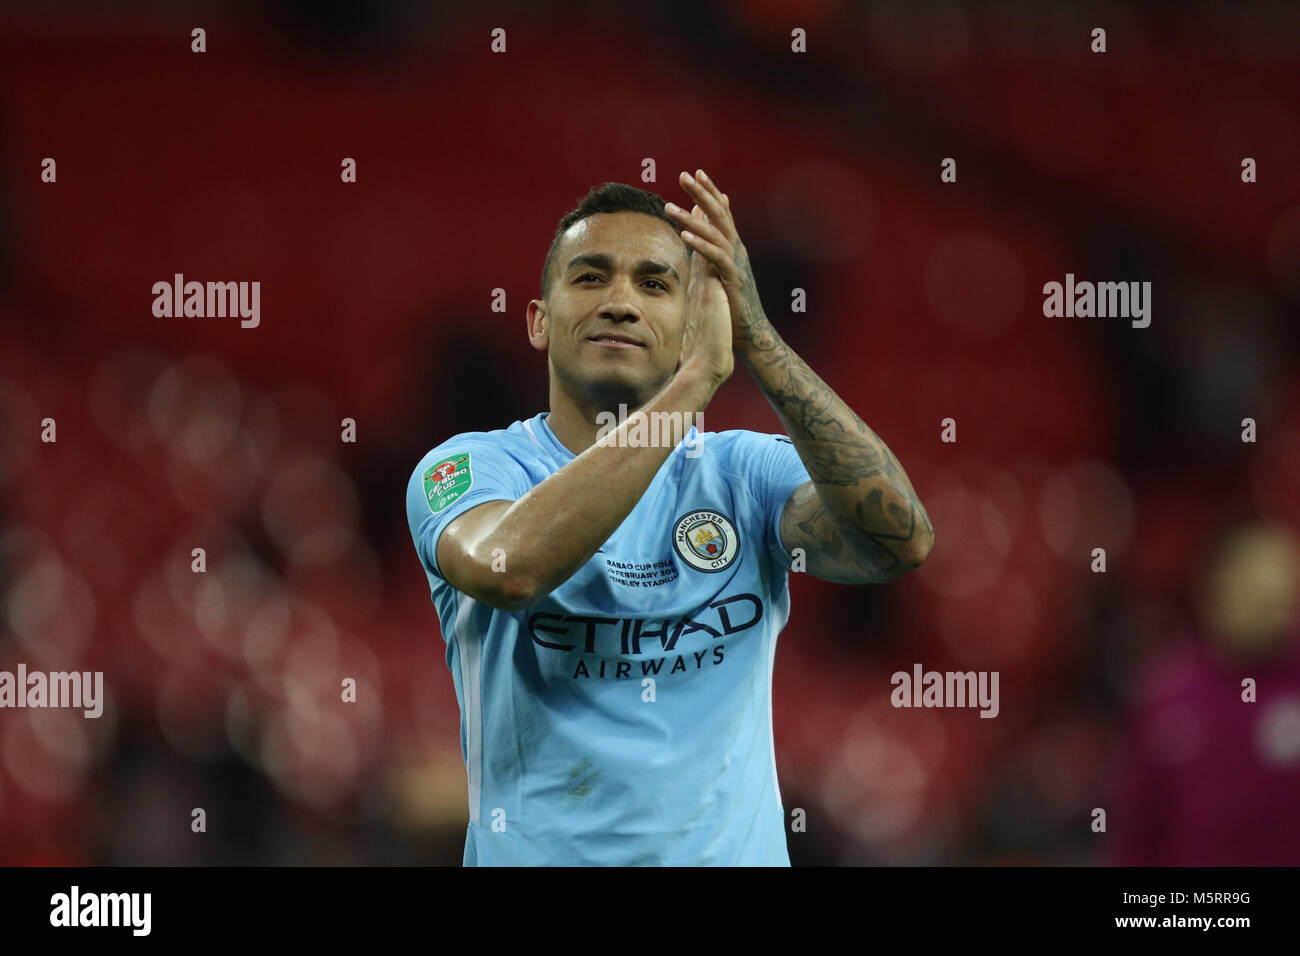 Wembley Stadium, London, UK. 25th Feb, 2018. Danilo (MC) at The Carabao Cup Final - Arsenal v Manchester City, at Wembley Stadium, London, on February 25, 2018. **THIS PICTURE IS FOR EDITORIAL USE ONLY** Credit: Paul Marriott/Alamy Live News Stock Photo